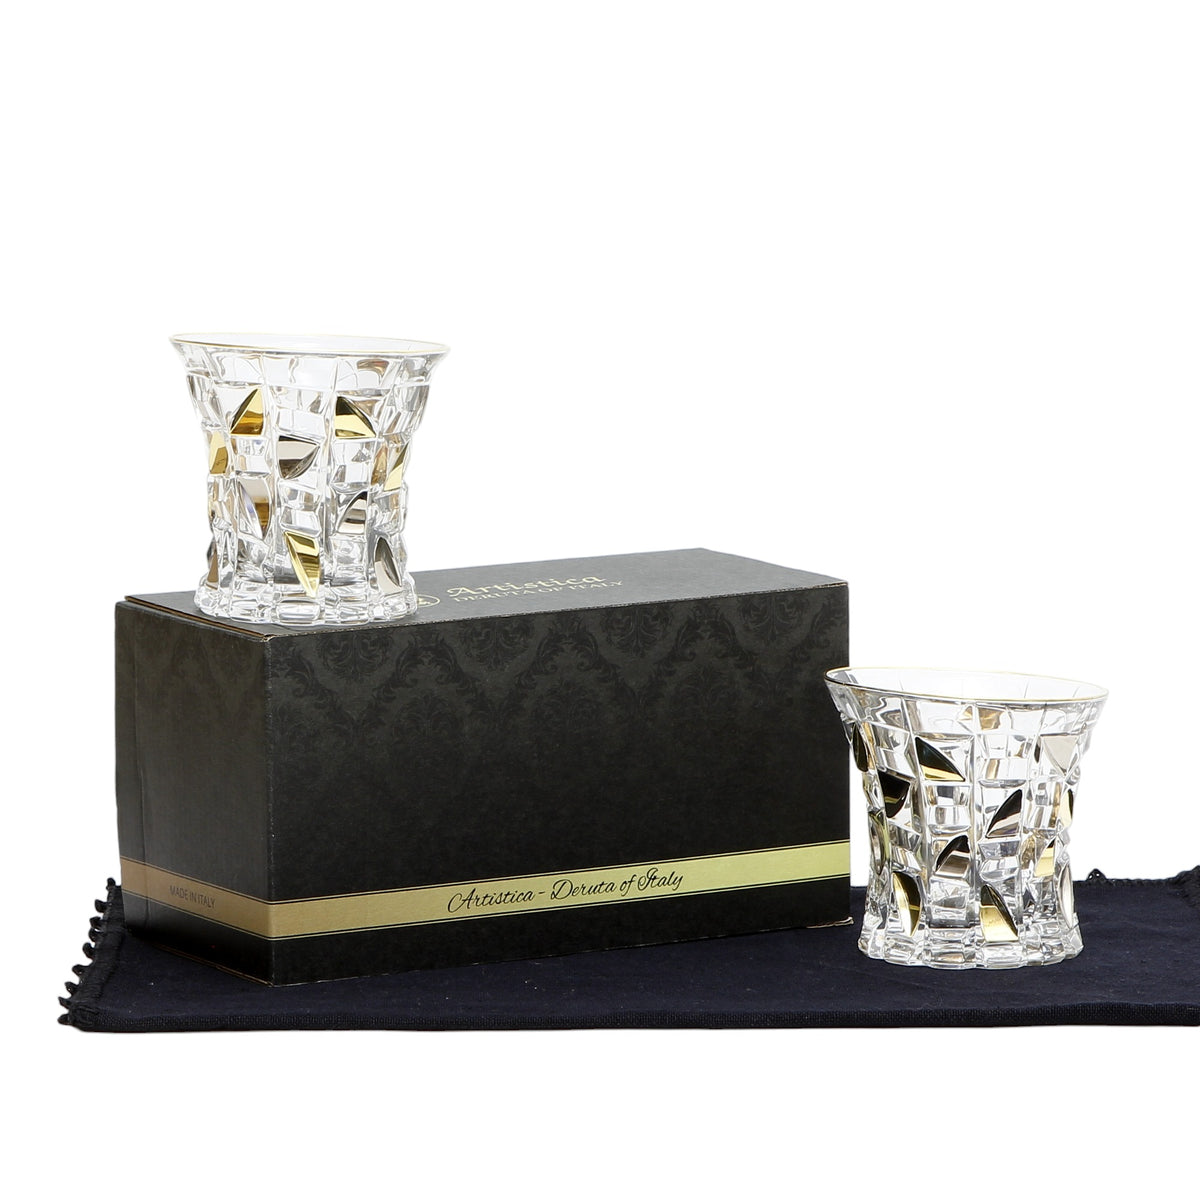 GIFT BOX With two EXQUISITE ITALIAN CRYSTAL FOR WHISKEY/OLD FASHION FEATURING A 24 CARAT GOLD &amp; PLATINUM RIM and ACCENTS